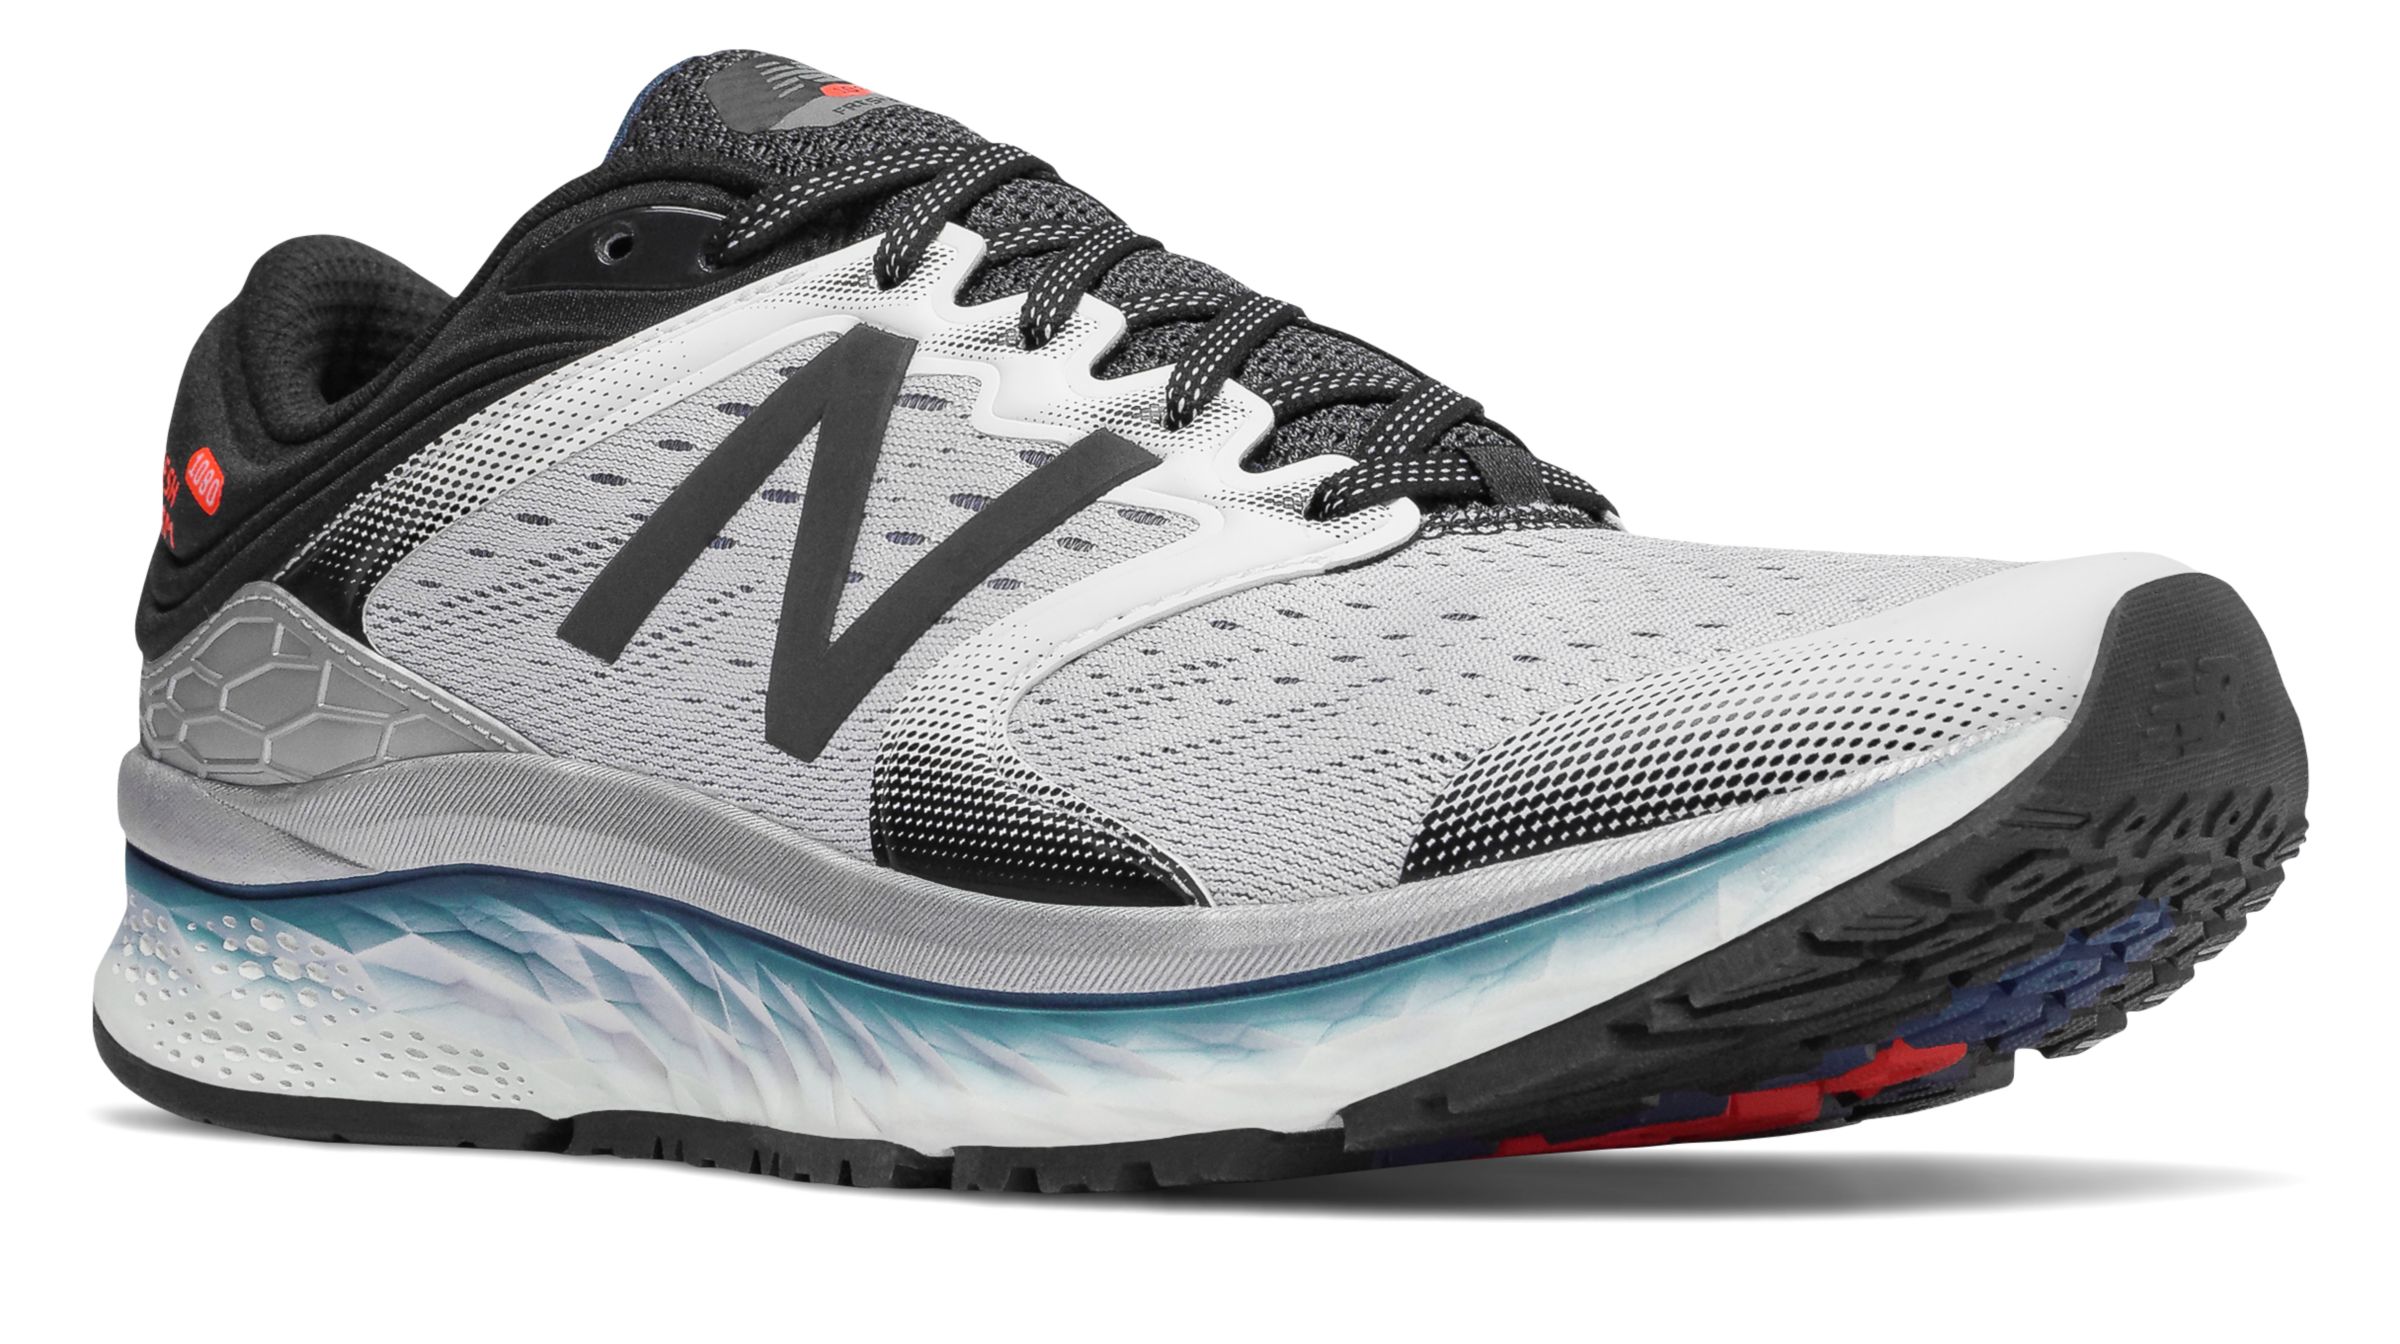 New Balance M1080-V8 on Sale - Discounts Up to 53% Off on M1080WB8 at Joe's  New Balance Outlet